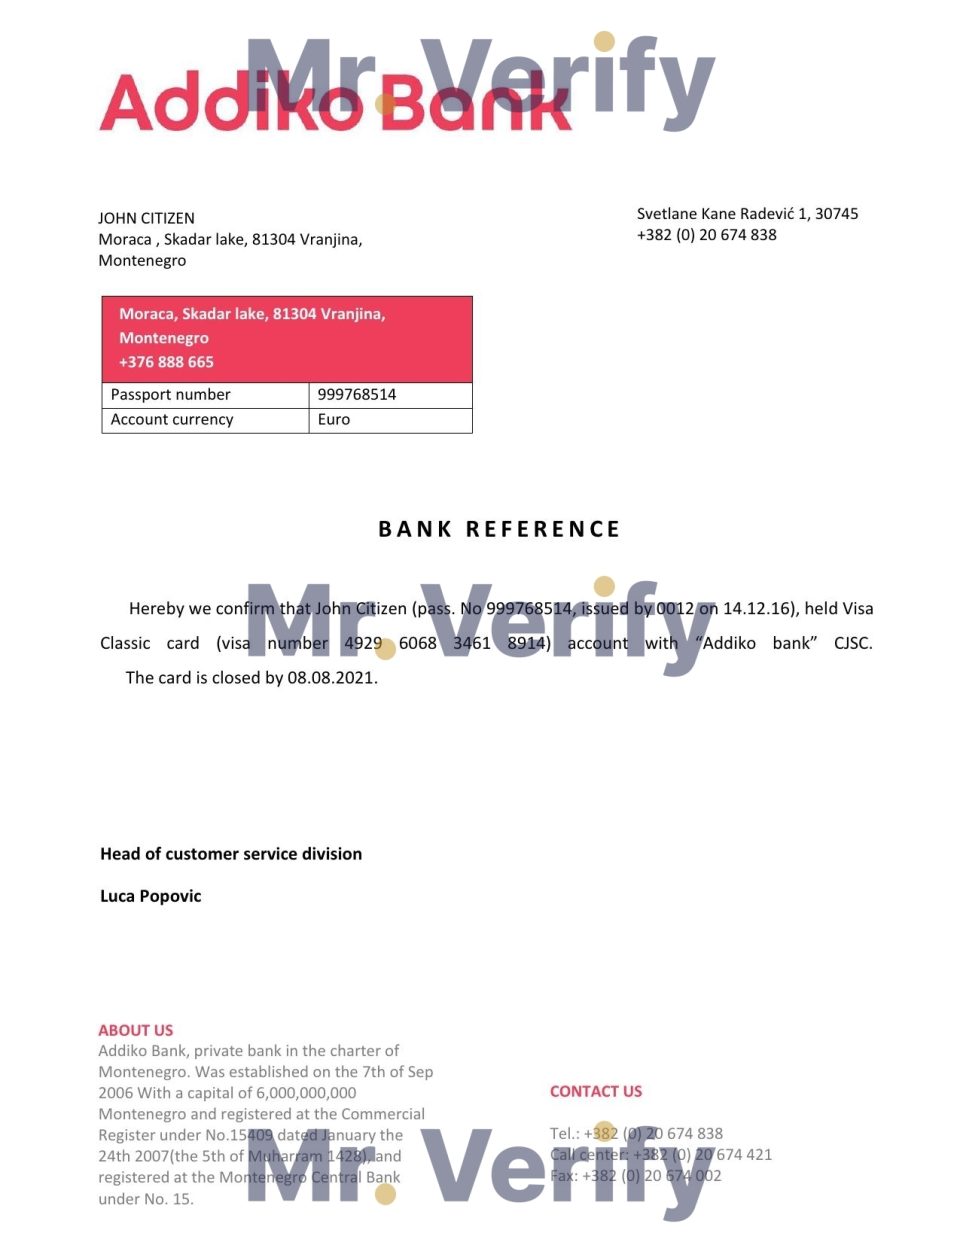 Download Montenegro Addiko Bank Reference Letter Templates | Editable Word